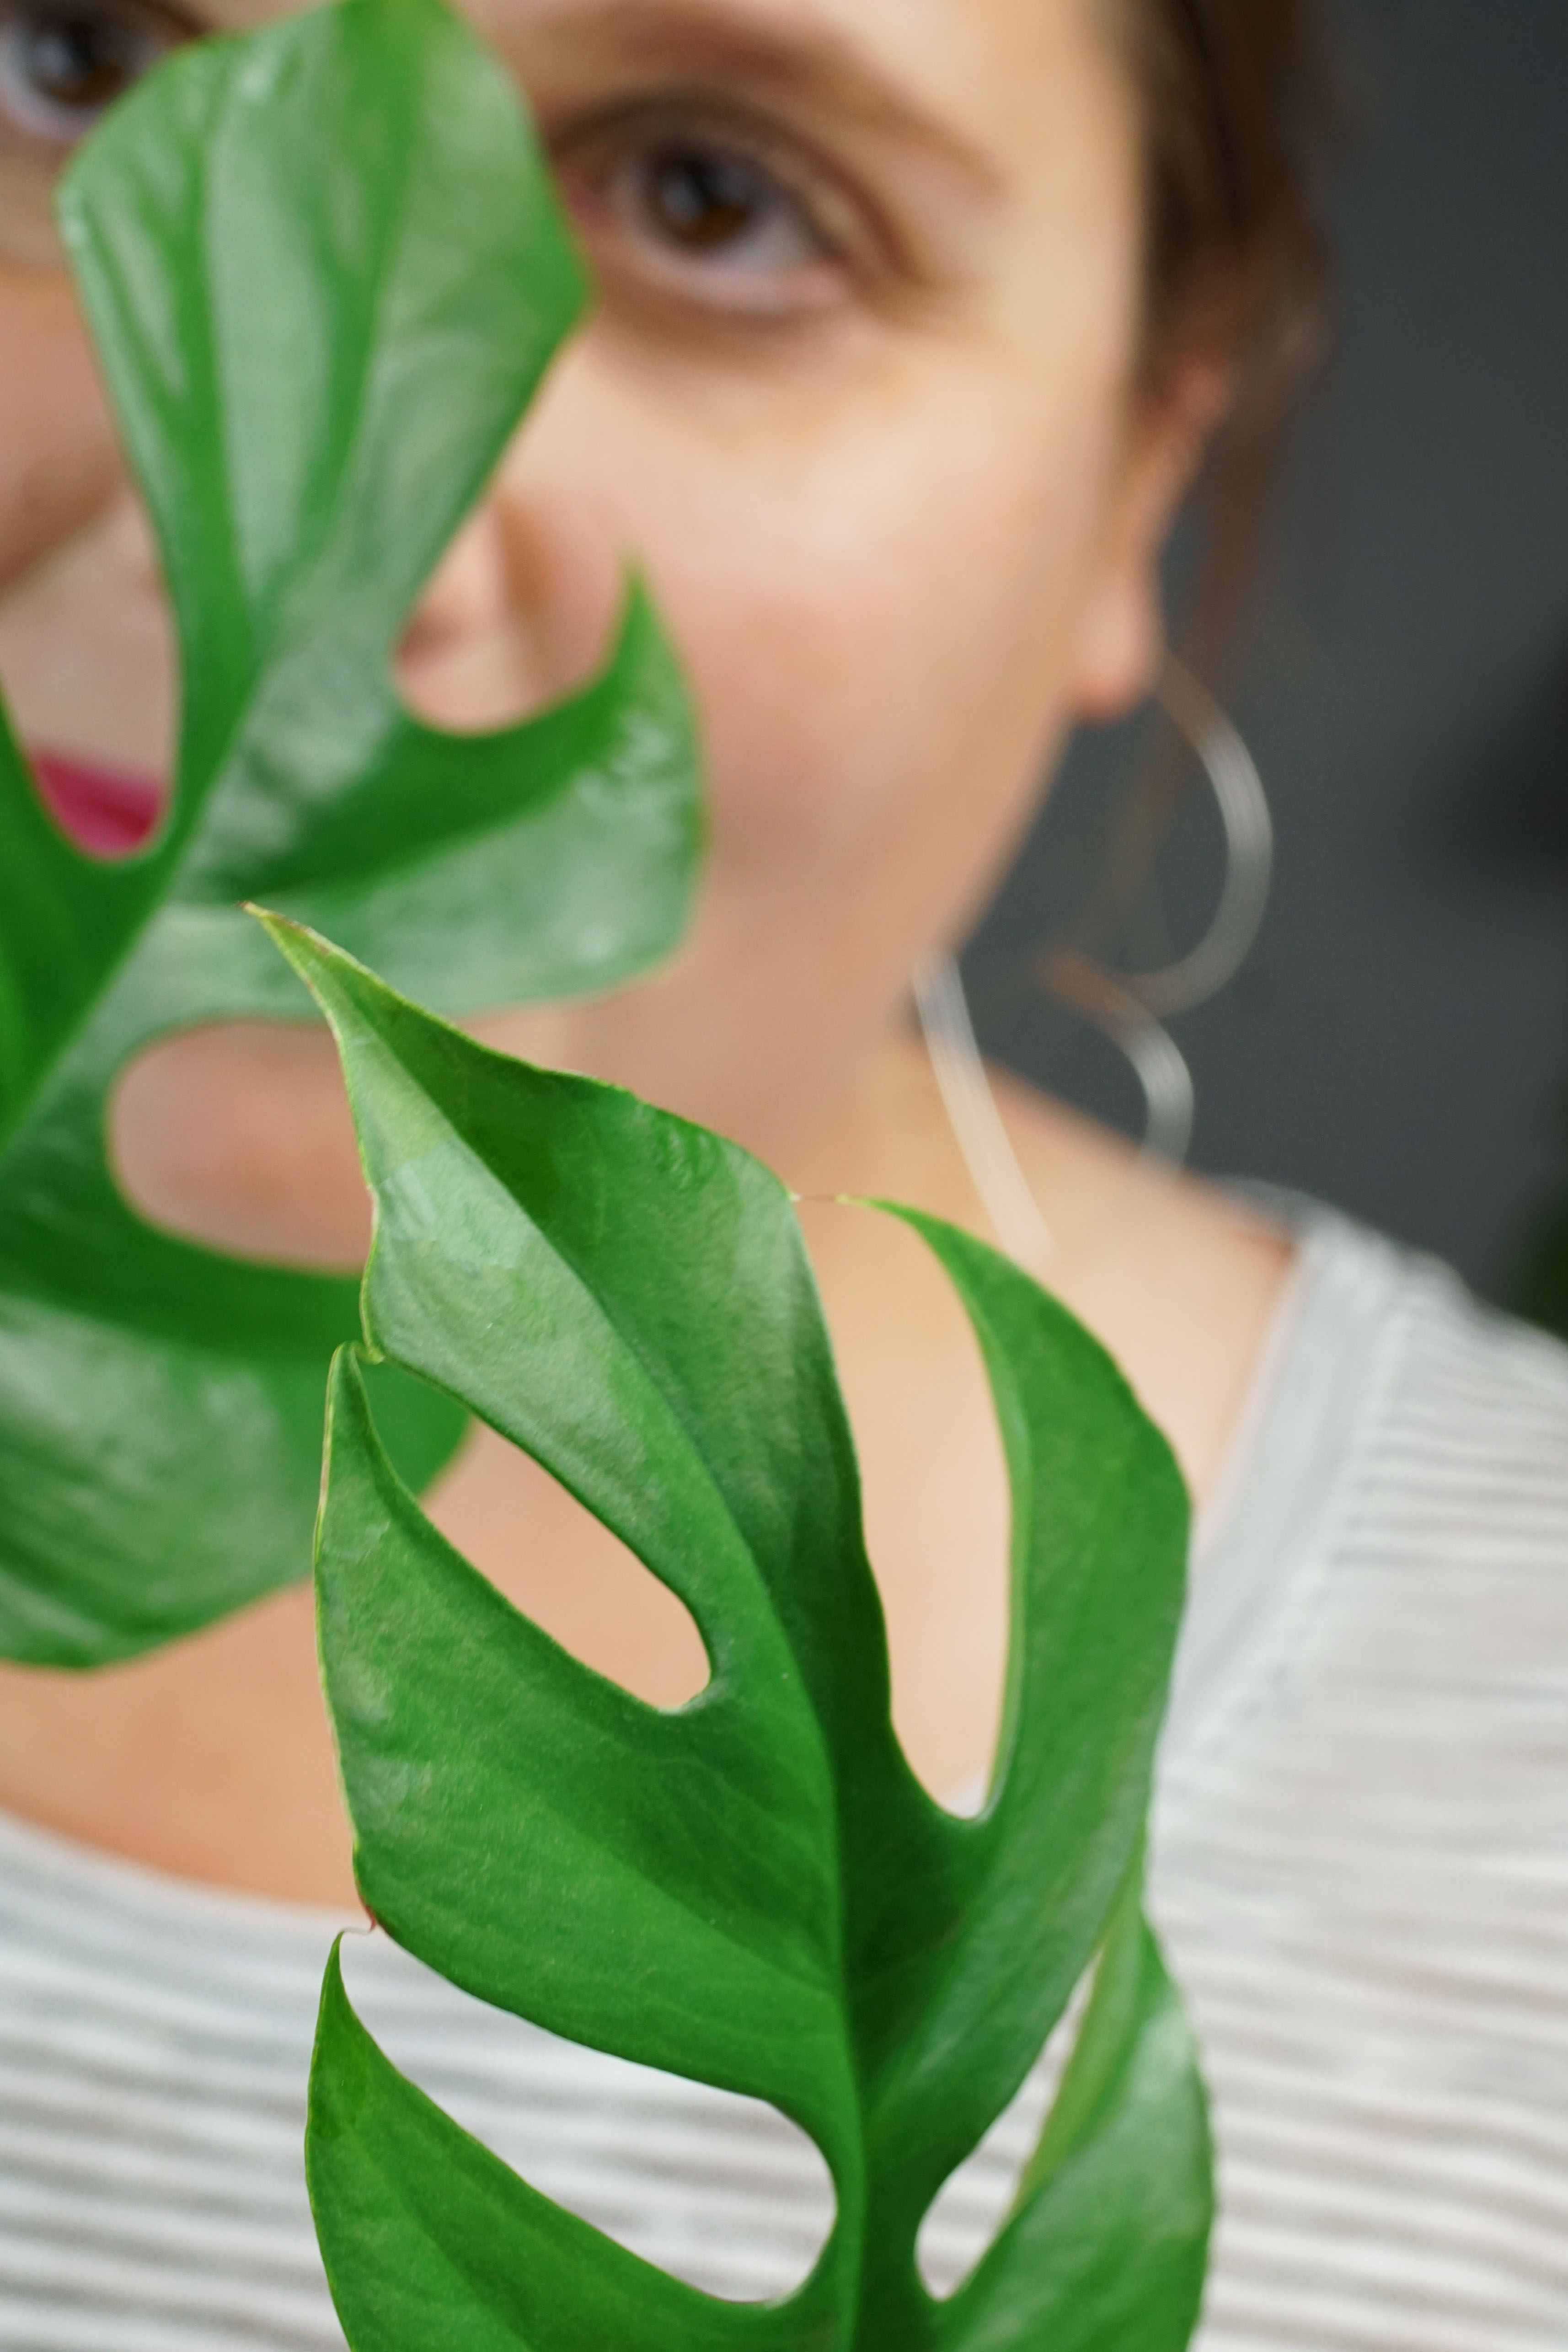 woman with red lipstick wearing silver hoop threader earrings and a striped shirt and hiding behind a plant